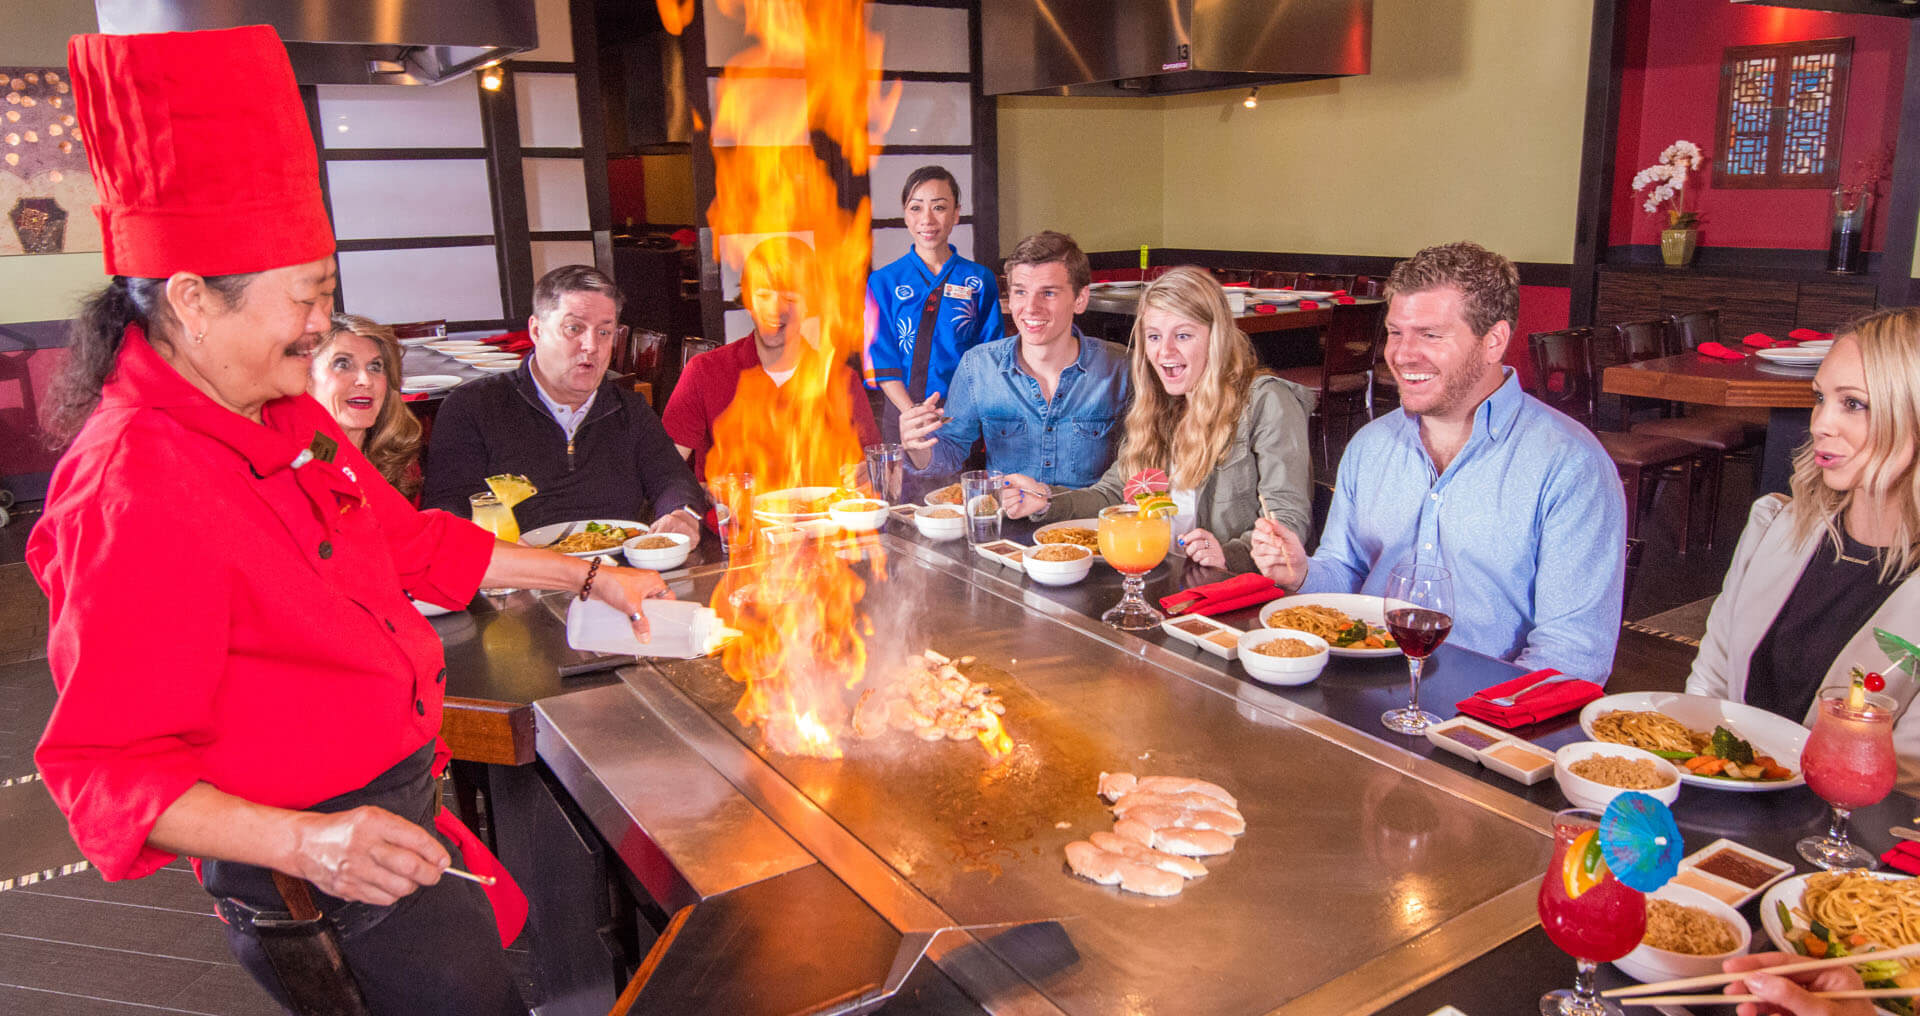 Kobe chef setting food on fire while people around the table watch in amazement